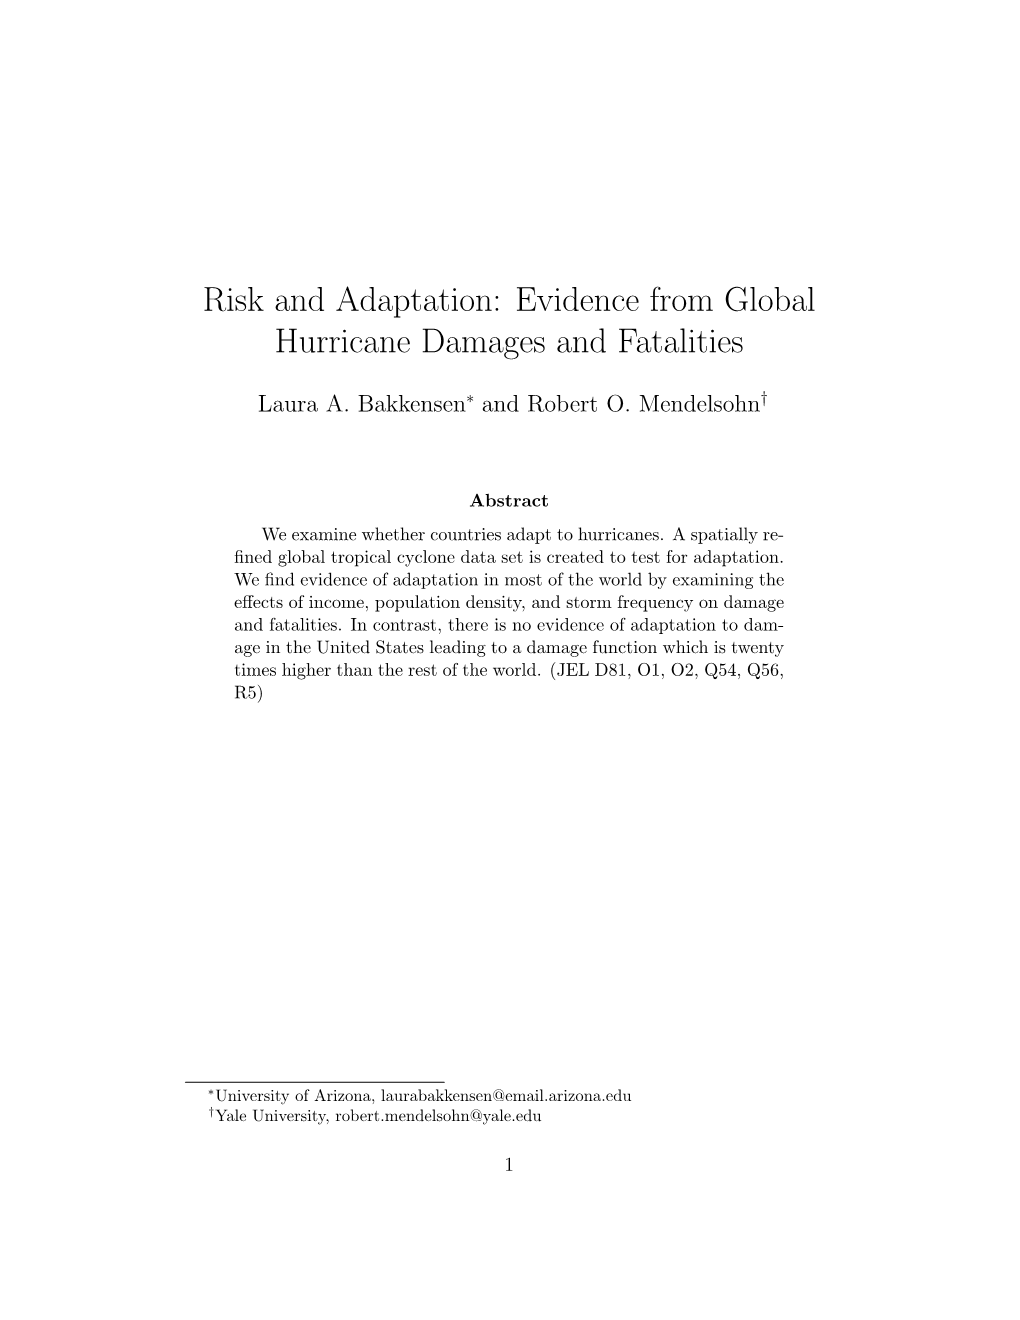 Risk and Adaptation: Evidence from Global Hurricane Damages and Fatalities